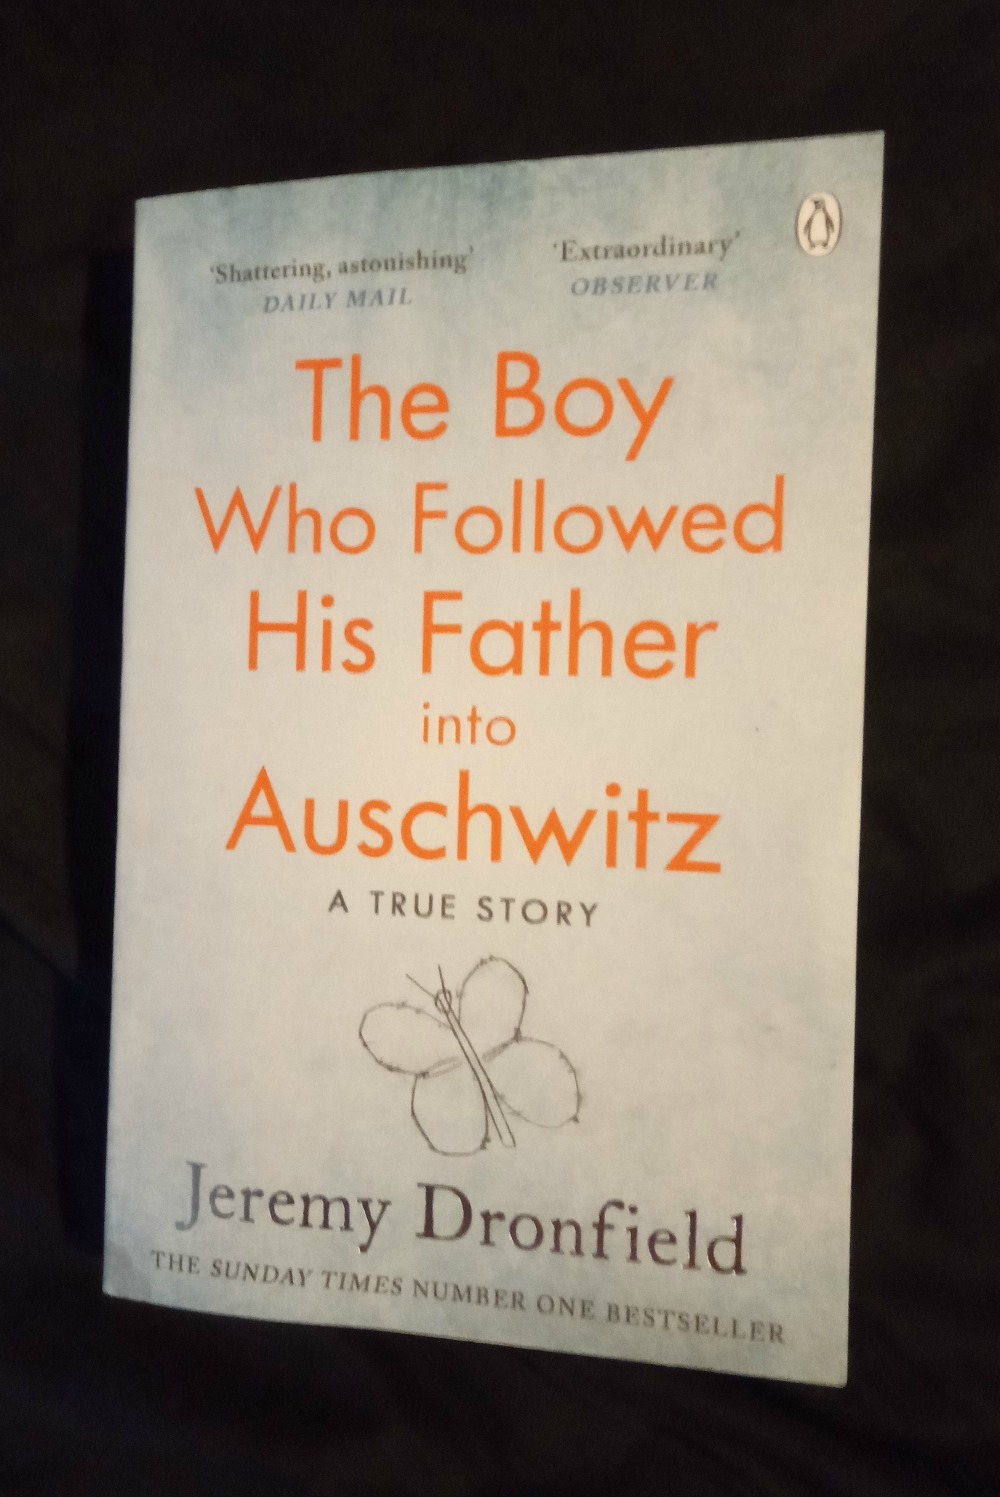 The Boy Who Followed His Father Into Auschwitz by Jeremy Dronfield